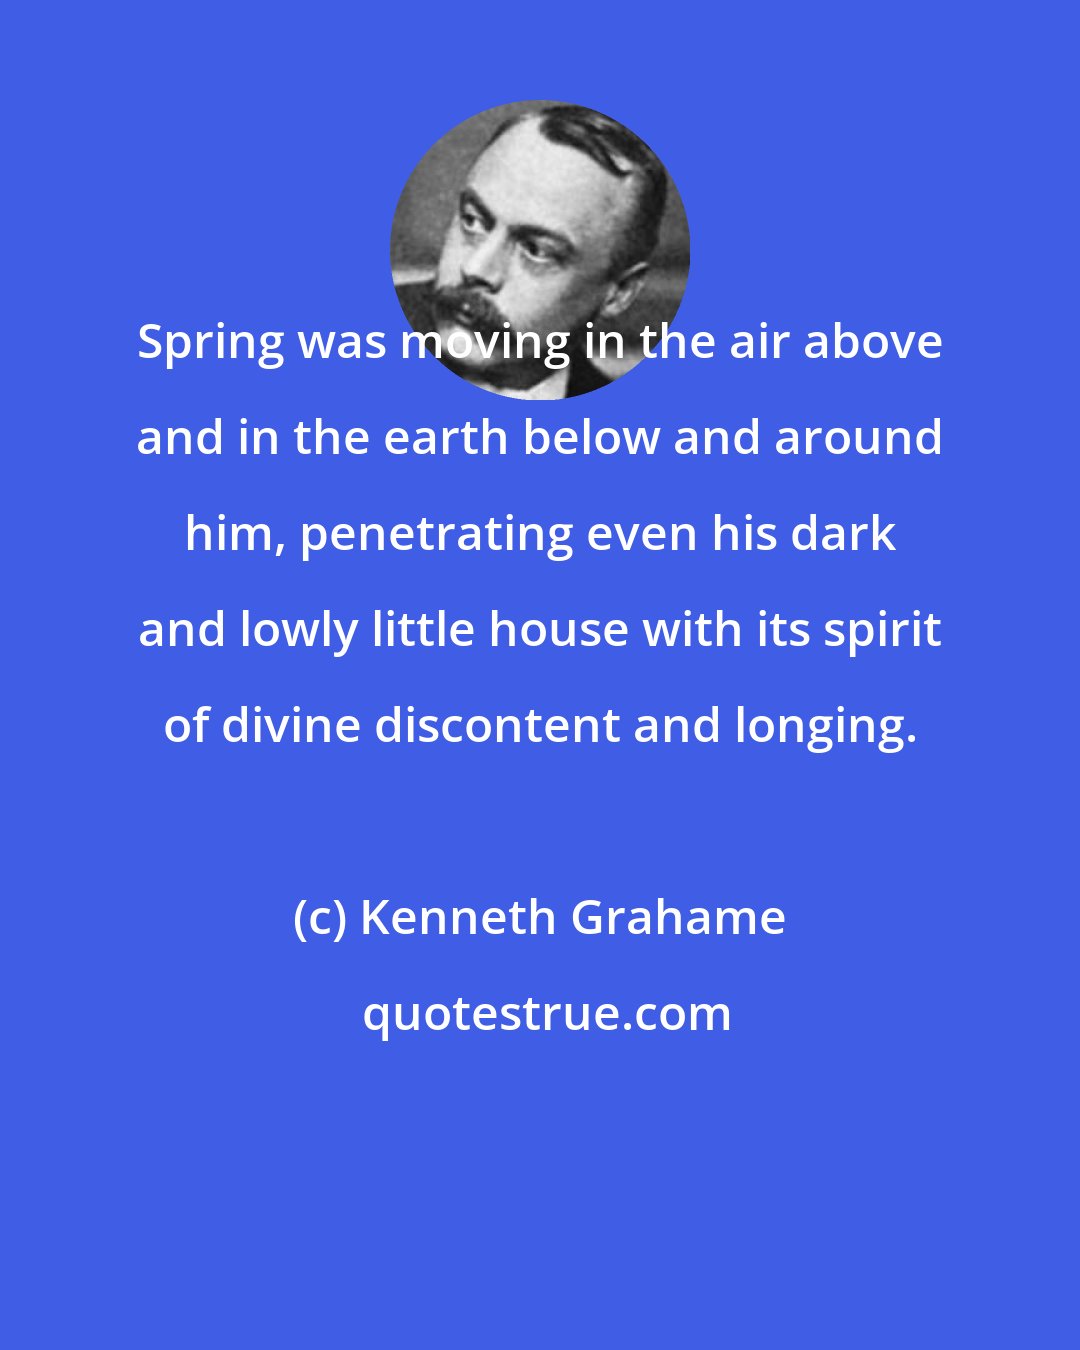 Kenneth Grahame: Spring was moving in the air above and in the earth below and around him, penetrating even his dark and lowly little house with its spirit of divine discontent and longing.